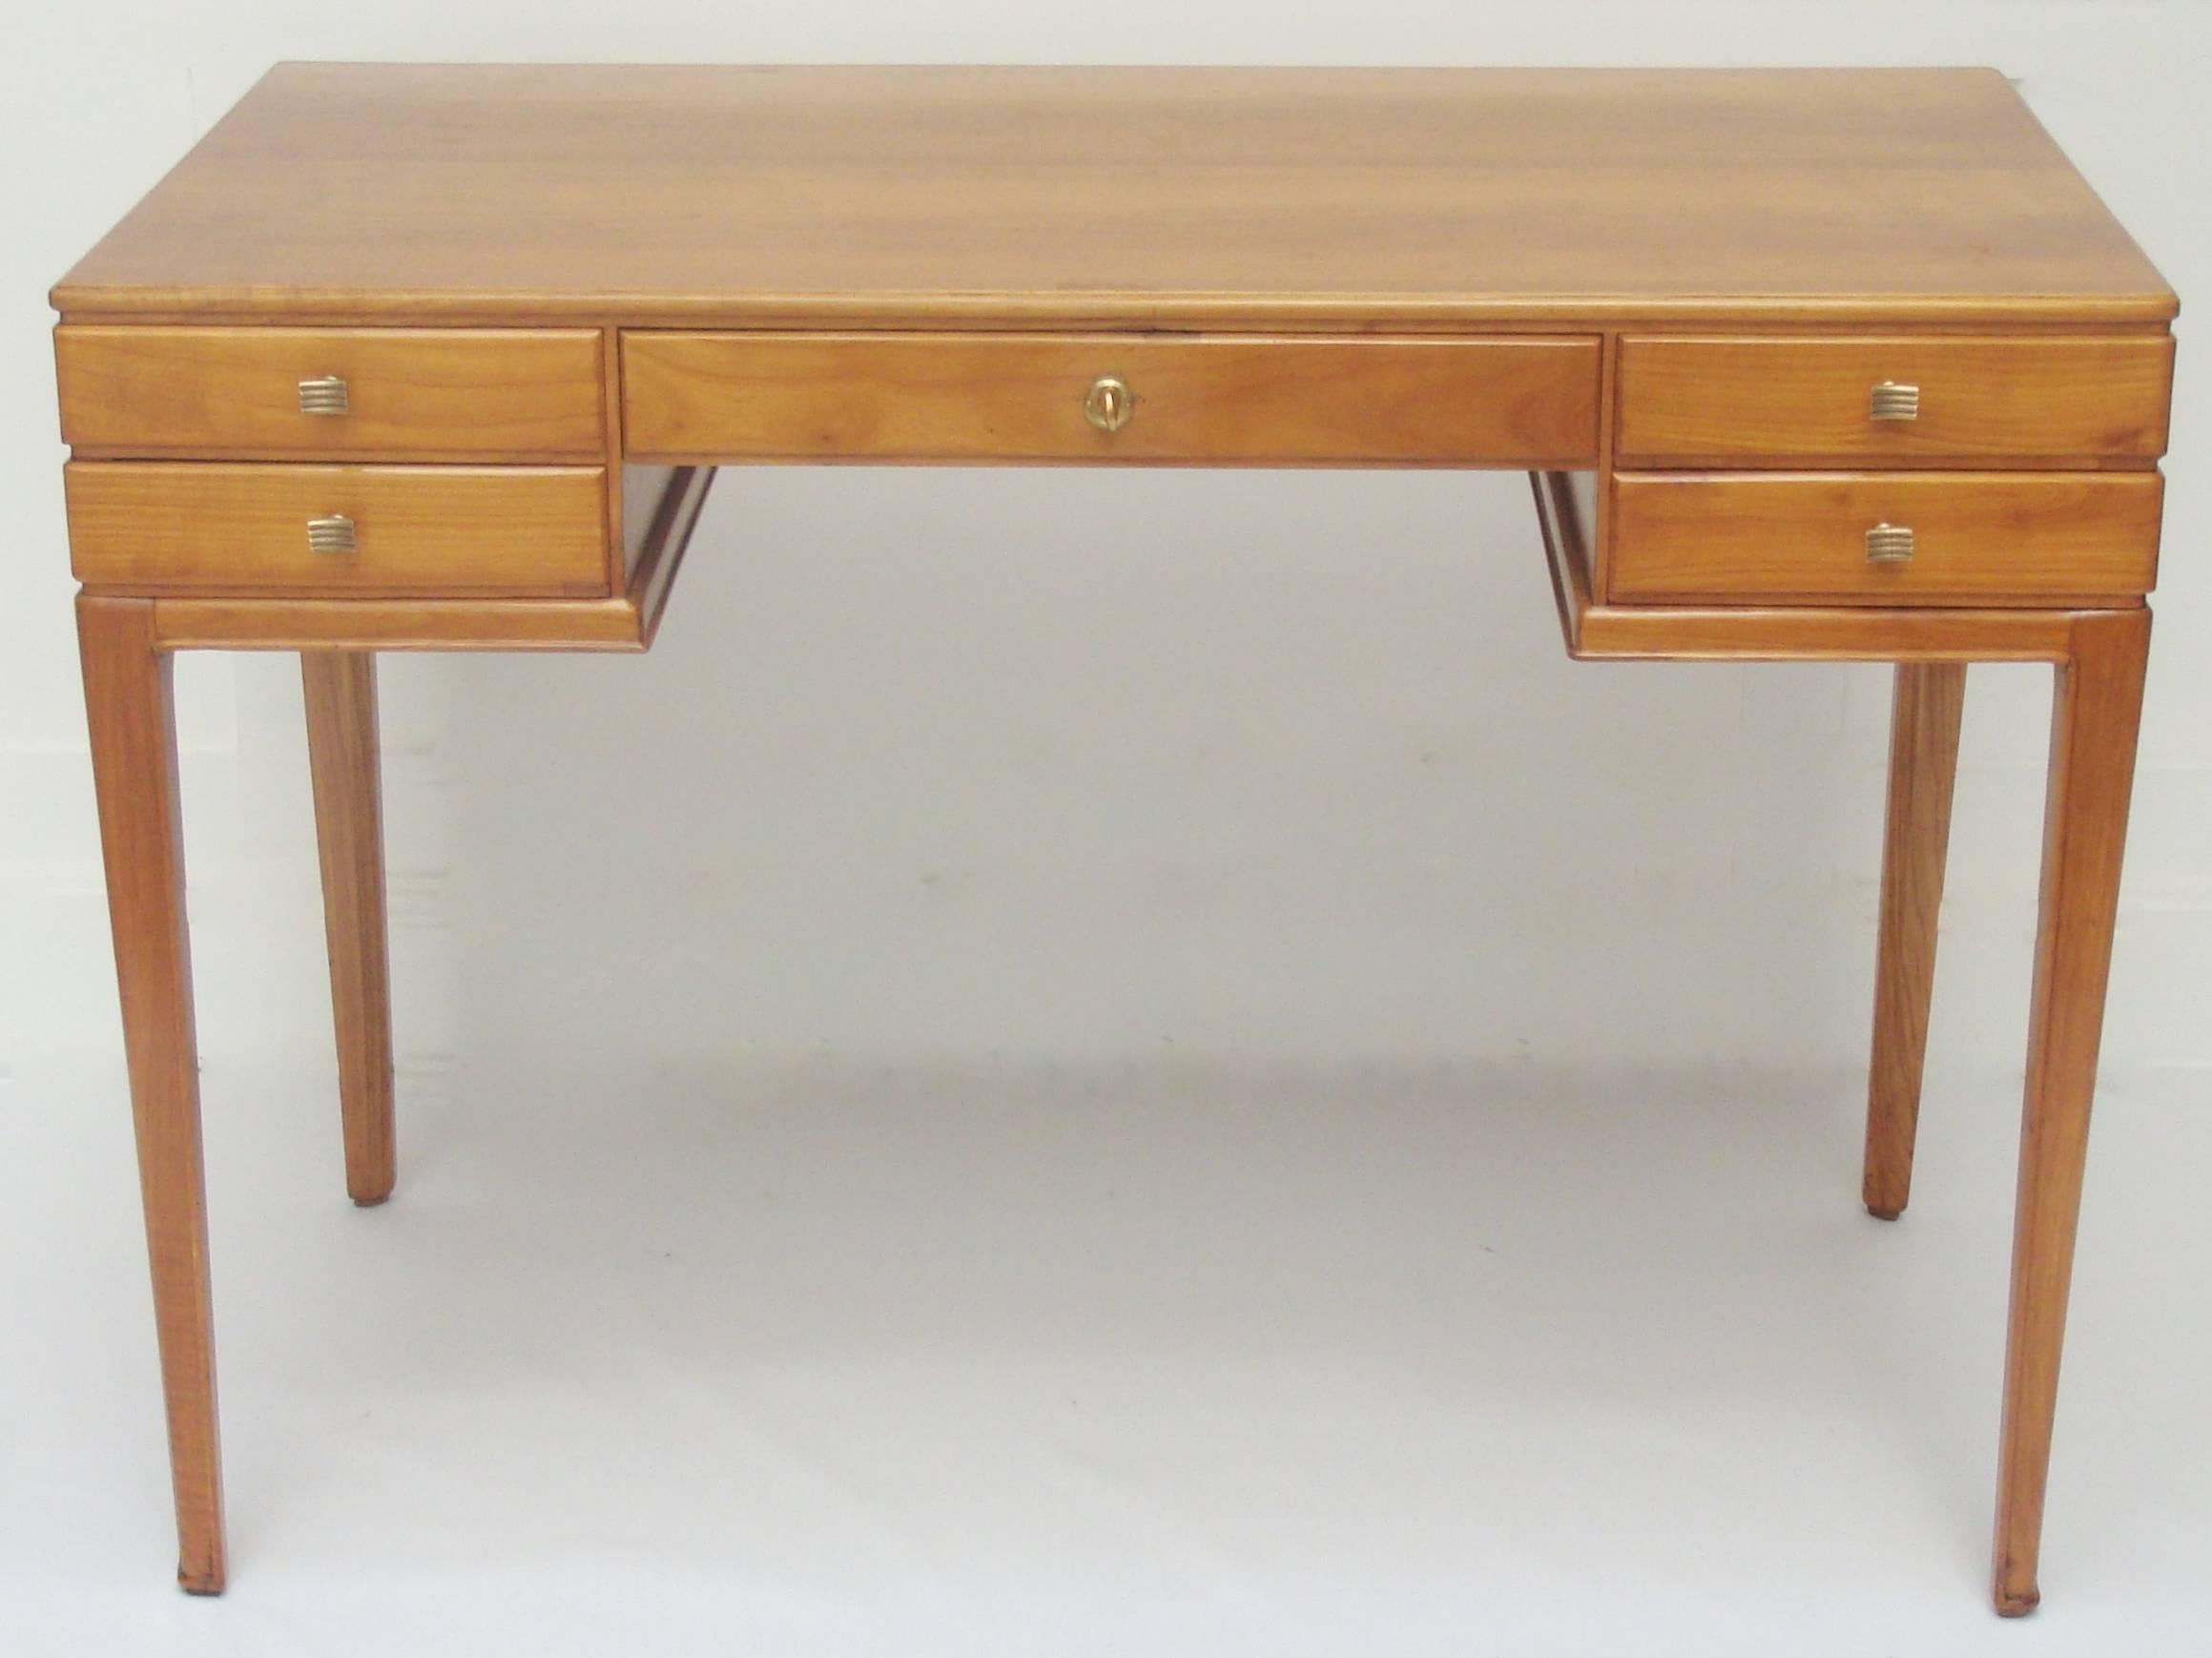 A five-drawer cherrywood writing desk with brass details attributed to Guglielmo Ulrich.  